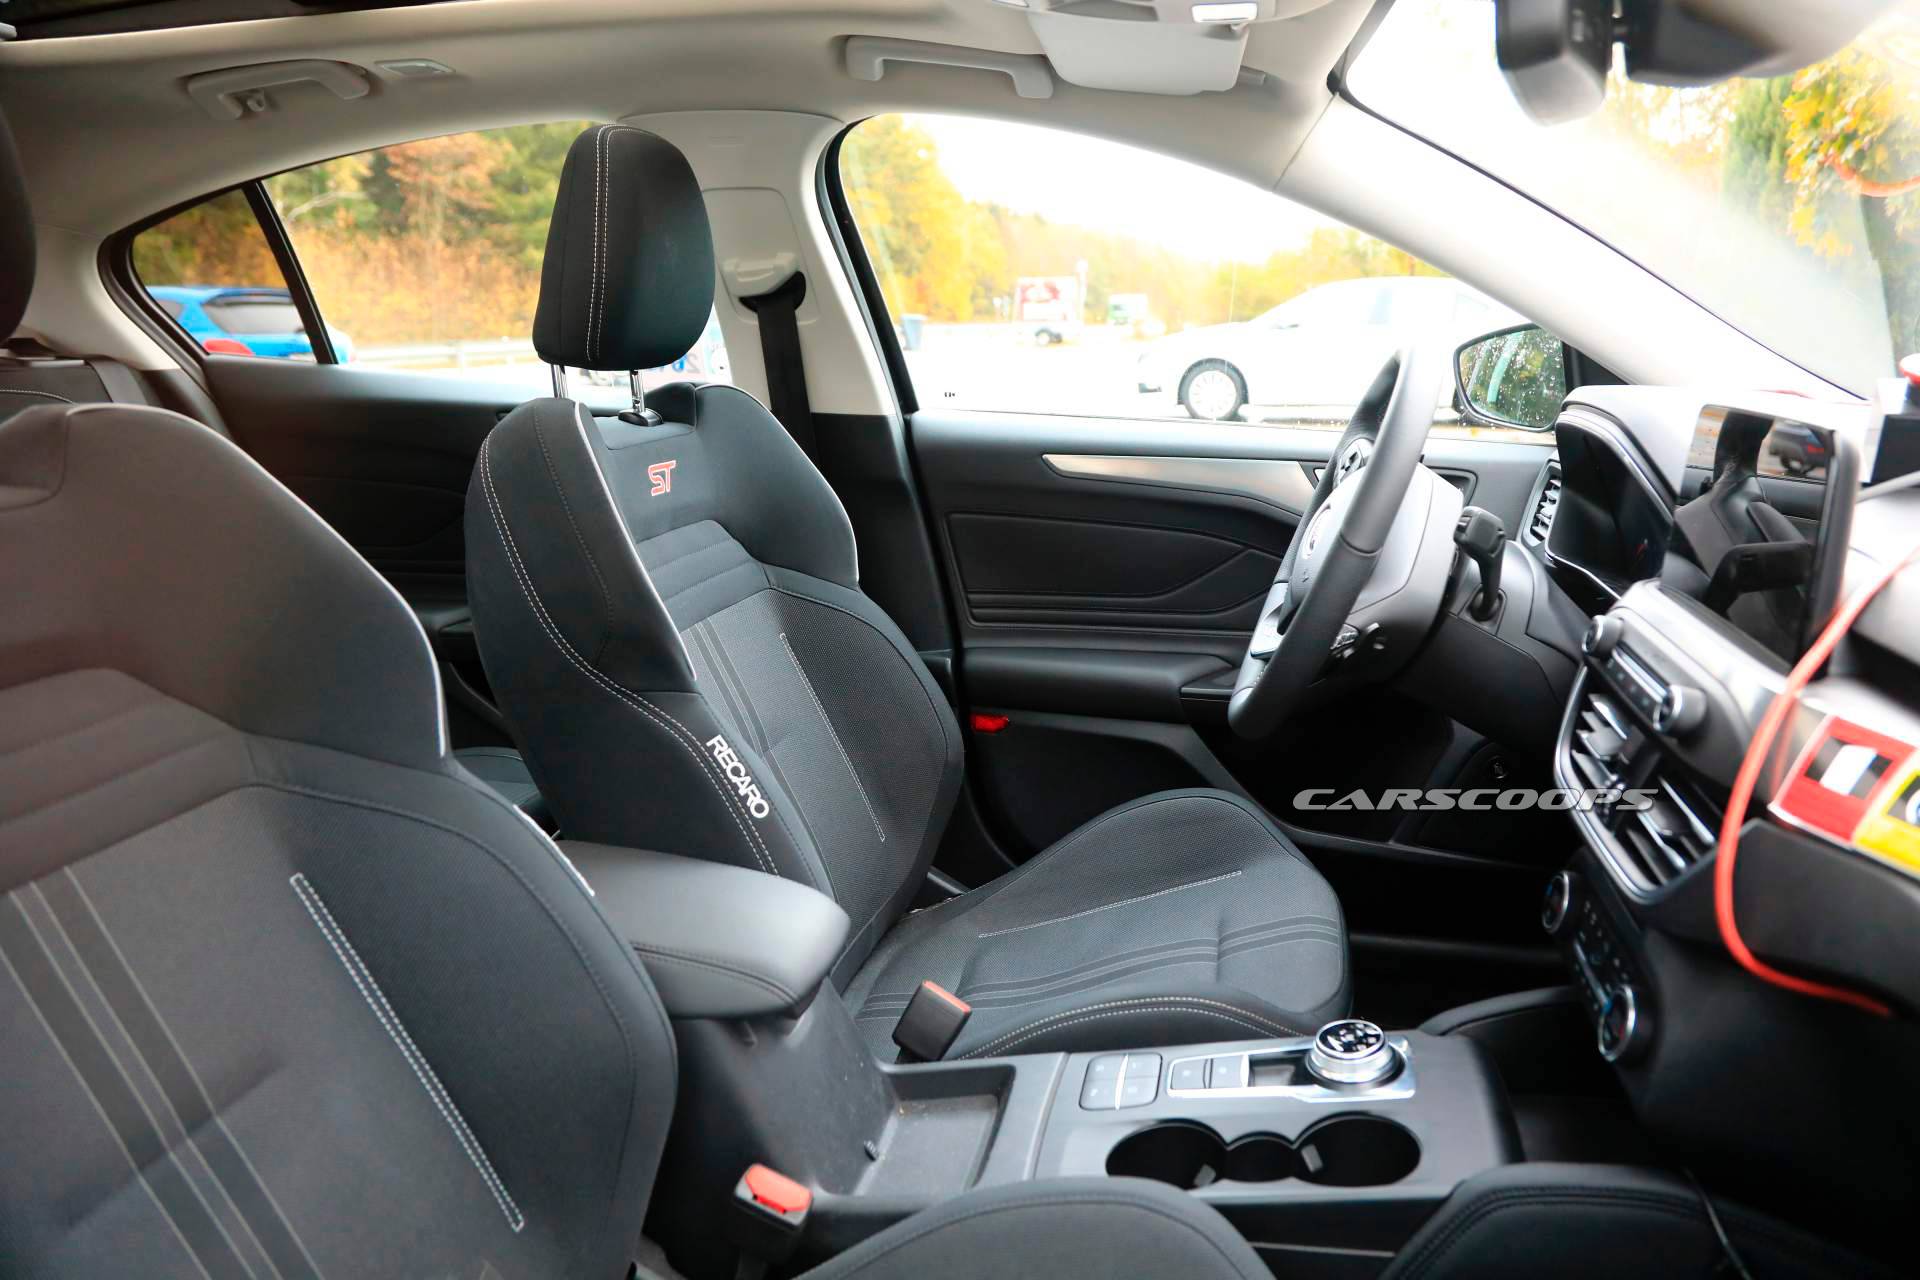 19 Ford Focus St Here It Is In Production Form Interior Included Carscoops